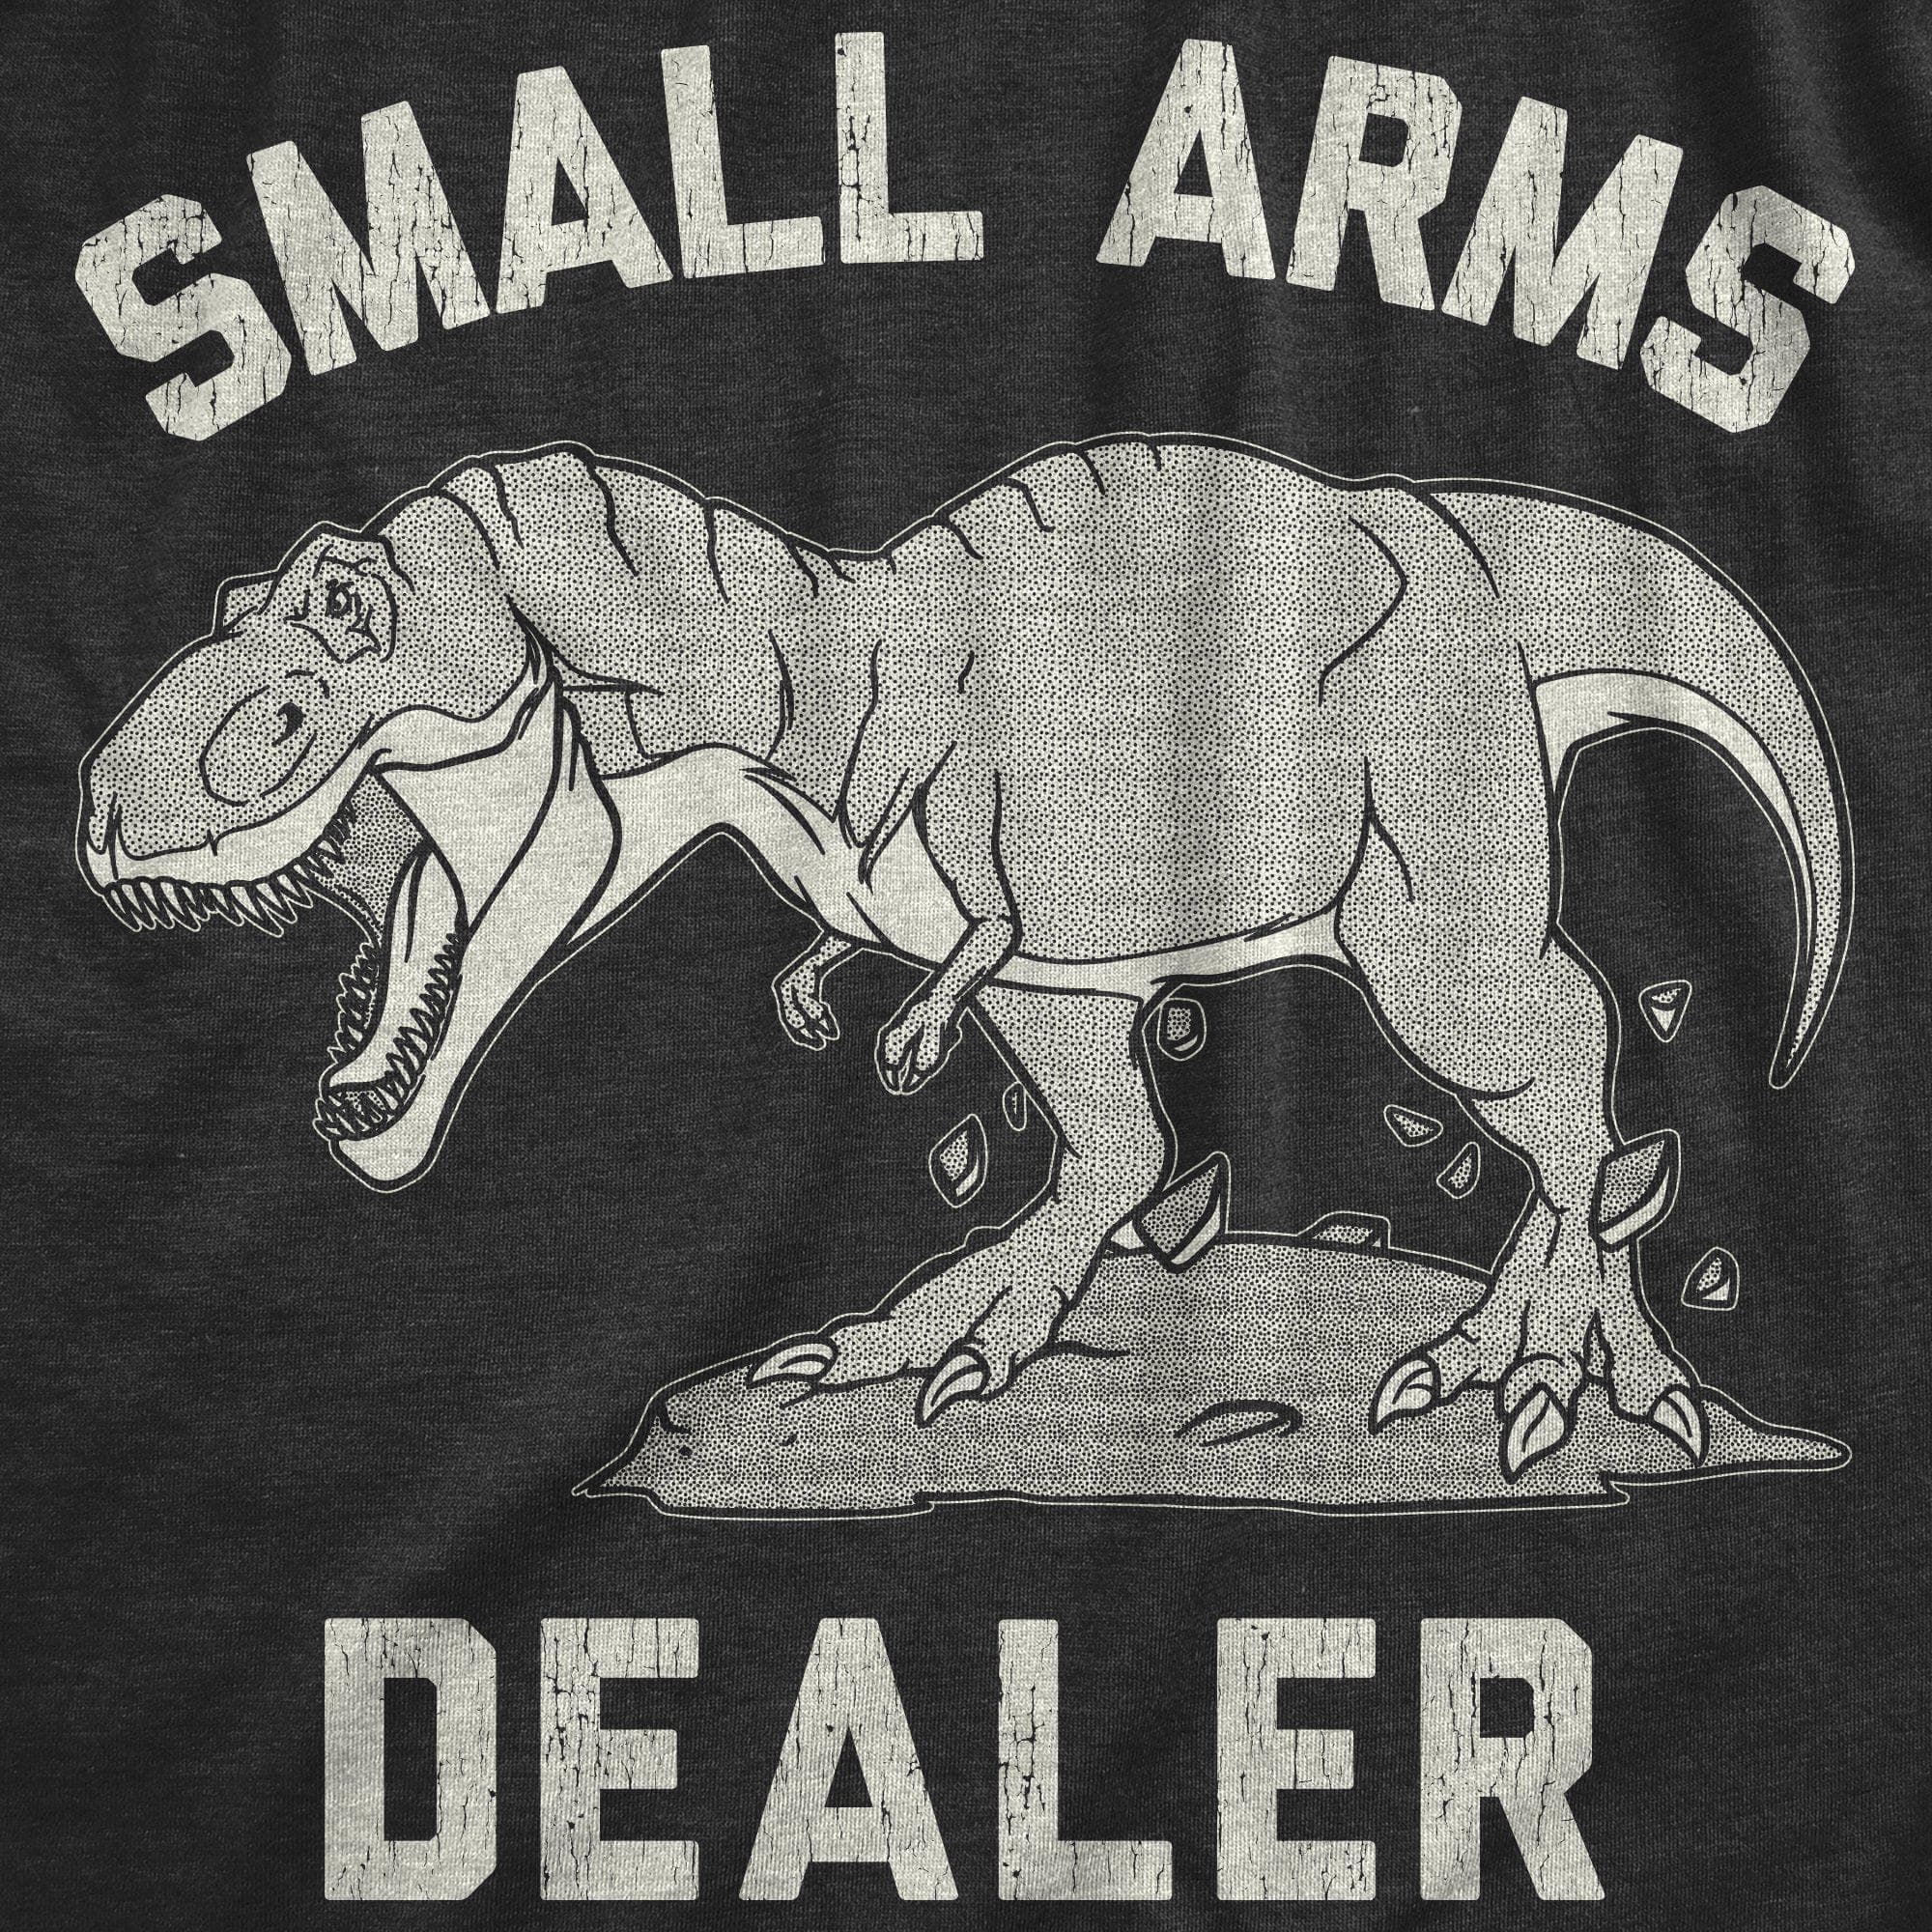 Small Arms Dealer Women's Tshirt - Crazy Dog T-Shirts